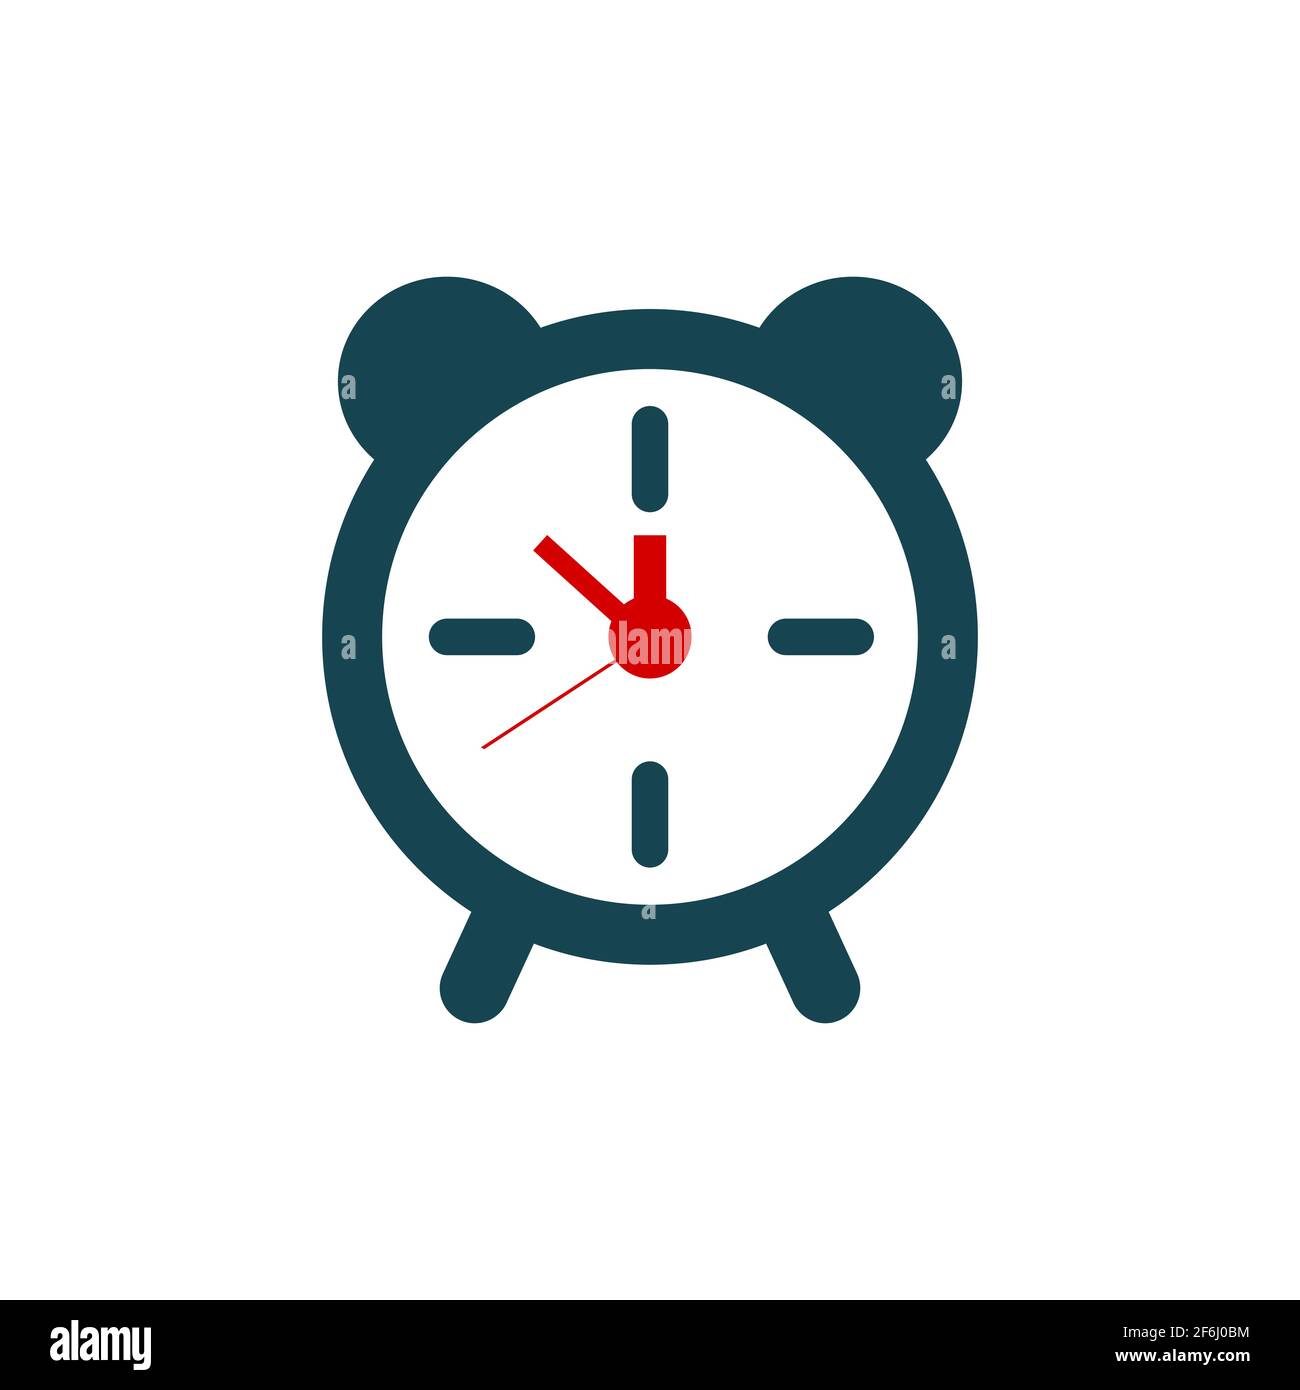 Analog alarm clock icon. Clock showing five minutes to twelve. Deadline concept. Wake up time. Blue clock with red handles. Last minute offer. Vector Stock Vector